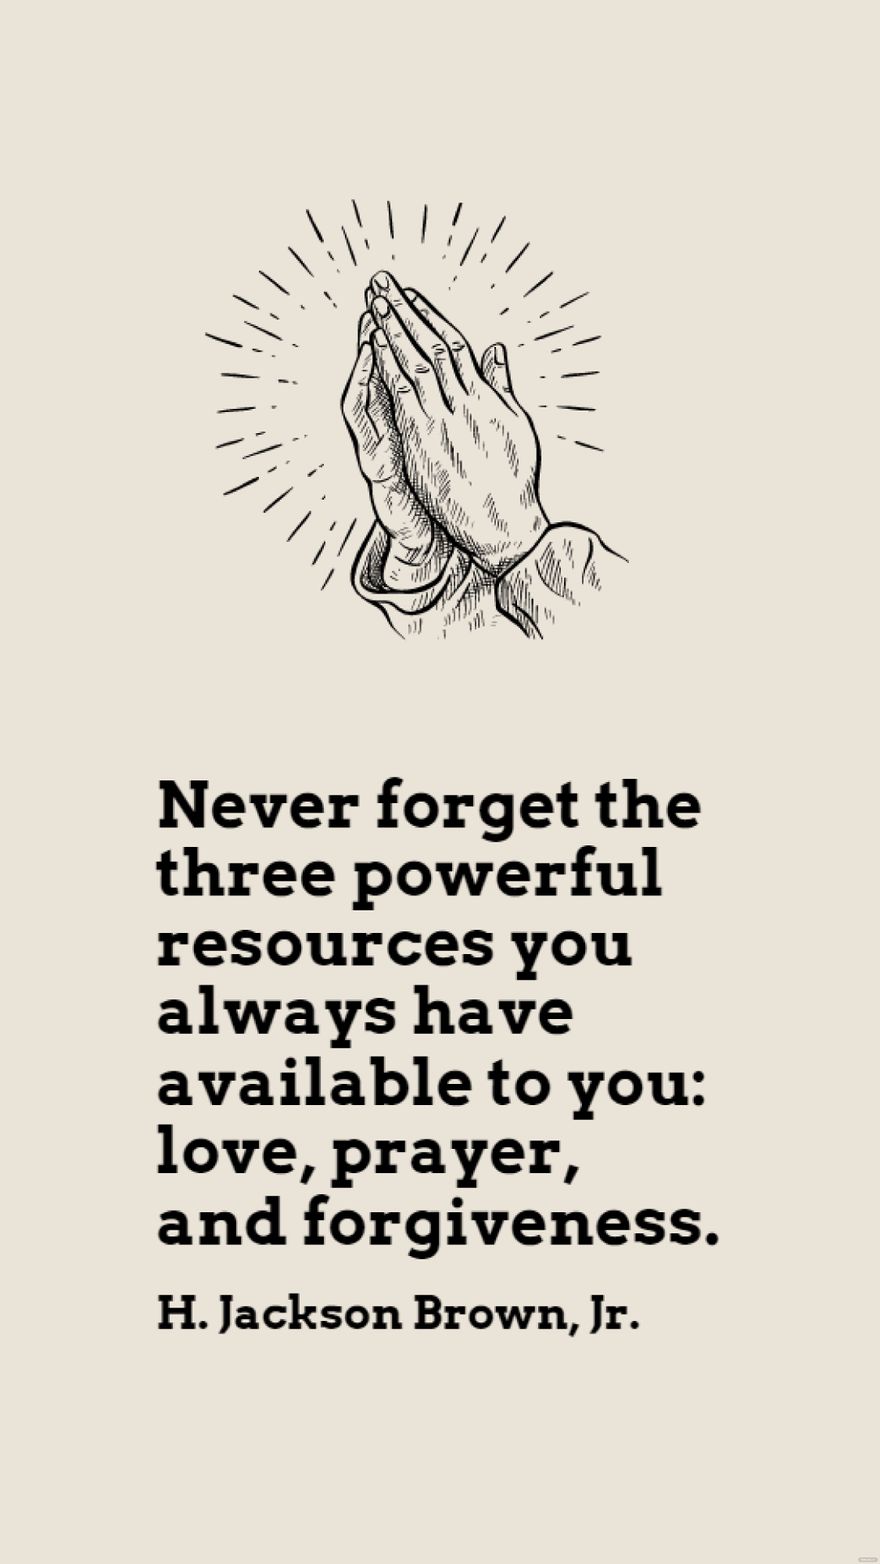 H. Jackson Brown, Jr. - Never forget the three powerful resources you always have available to you: love, prayer, and forgiveness.